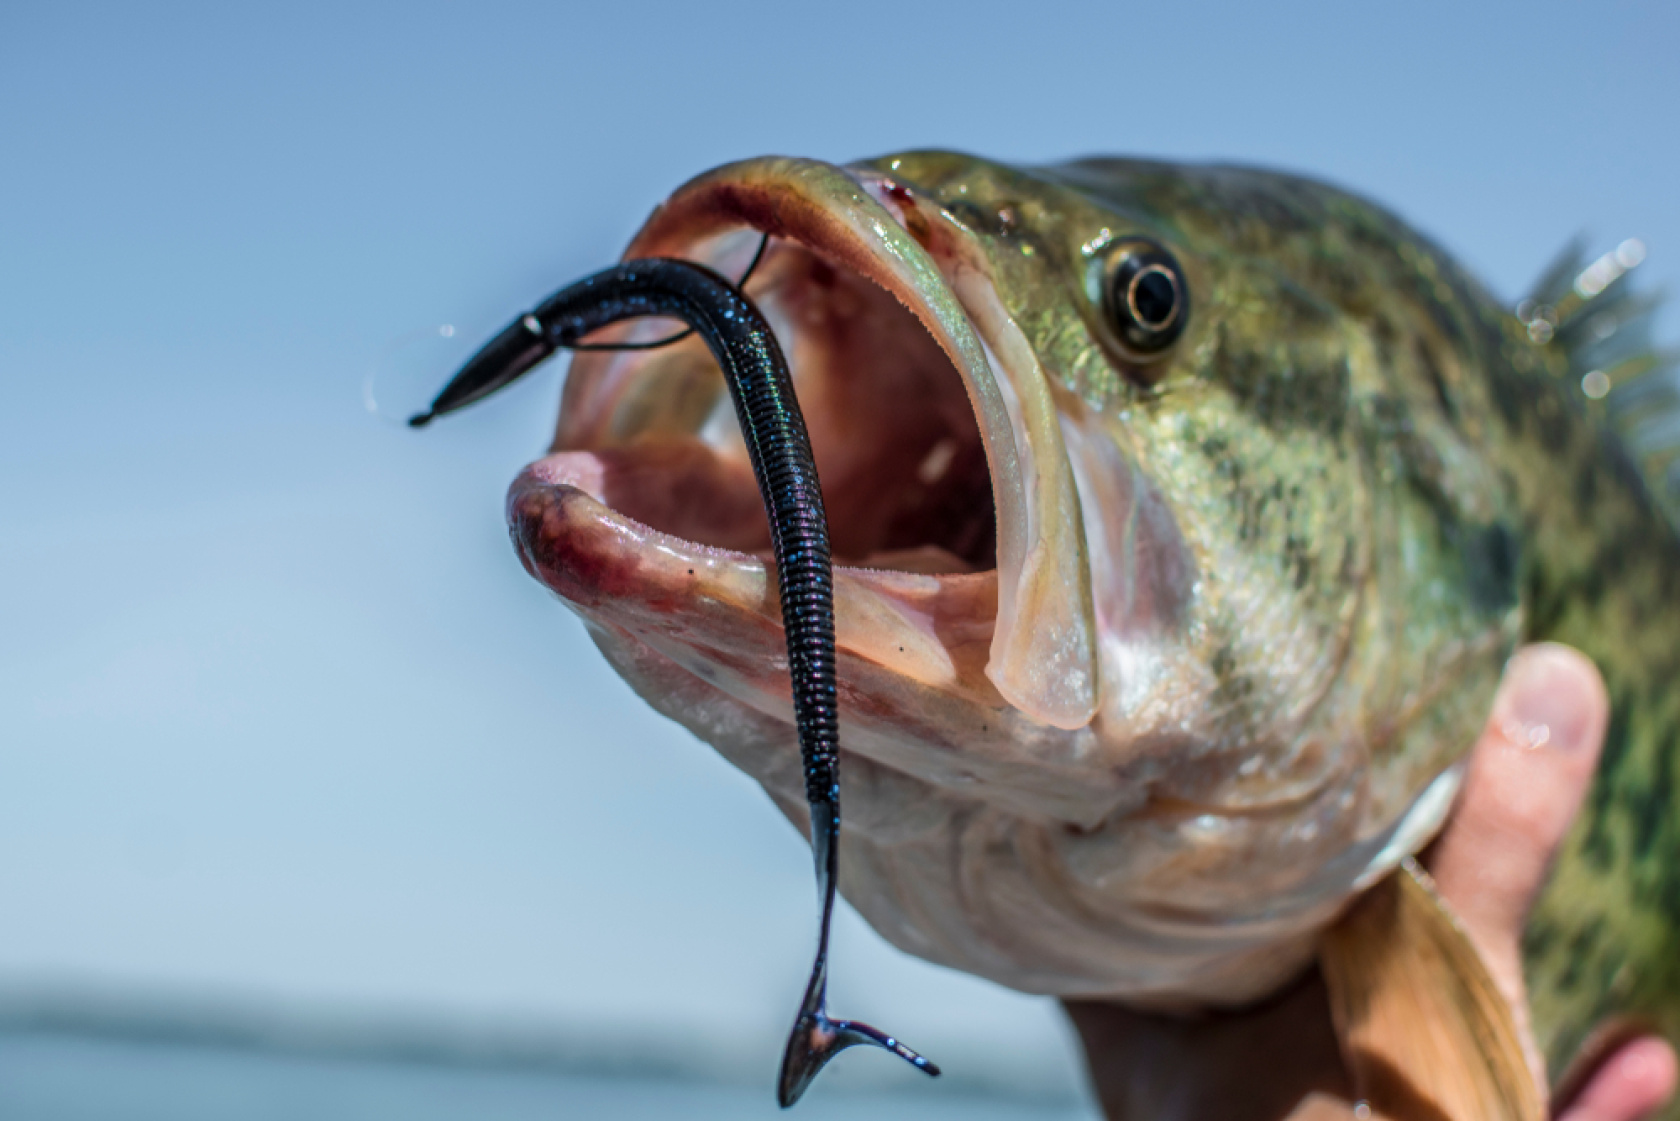 Catch bass with the help of bass fishing apps.